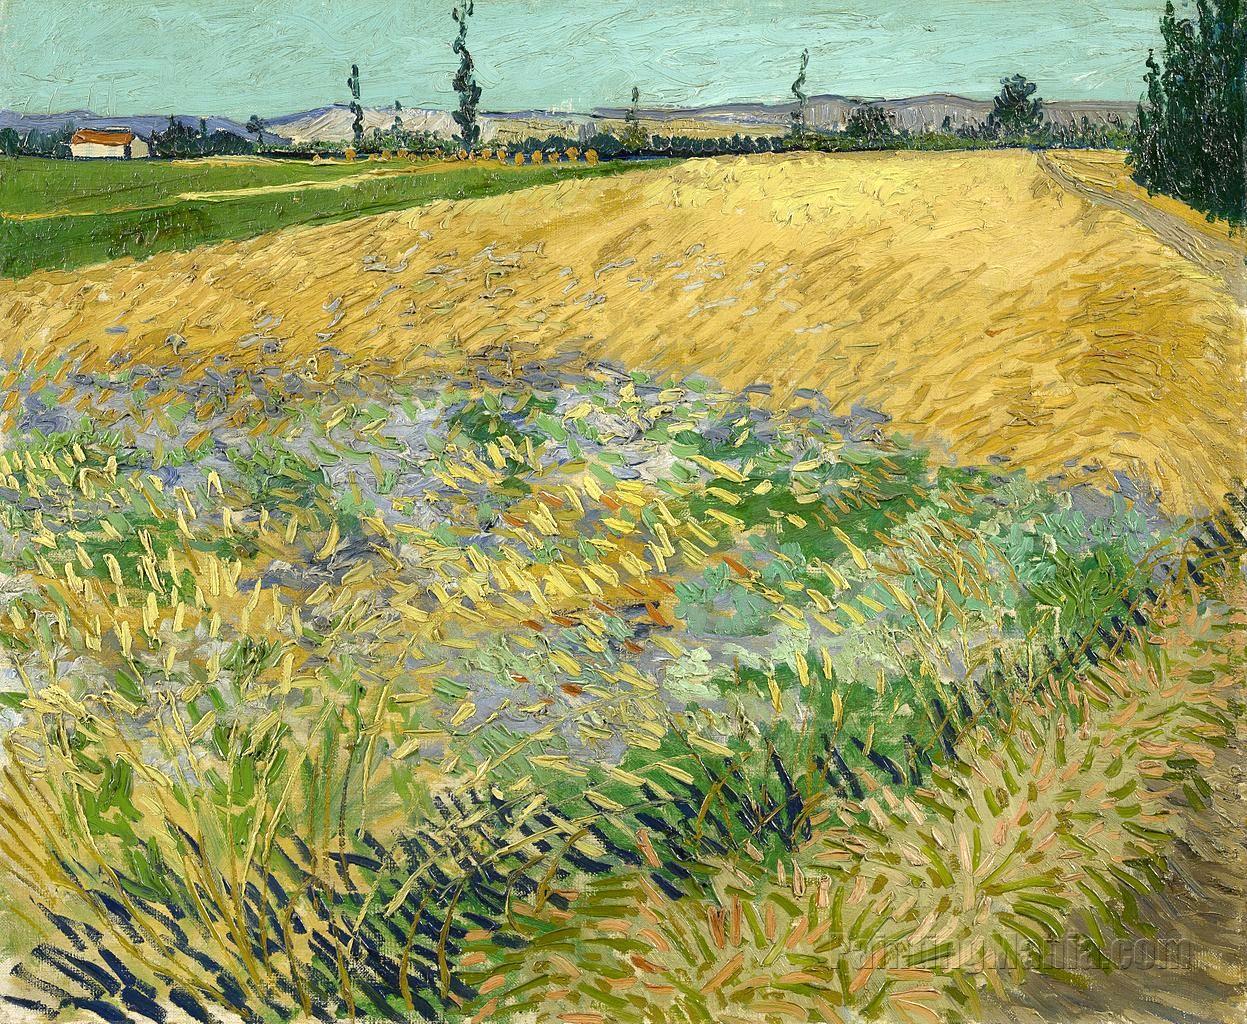 Wheat Field with the Alpilles Foothills in the Background